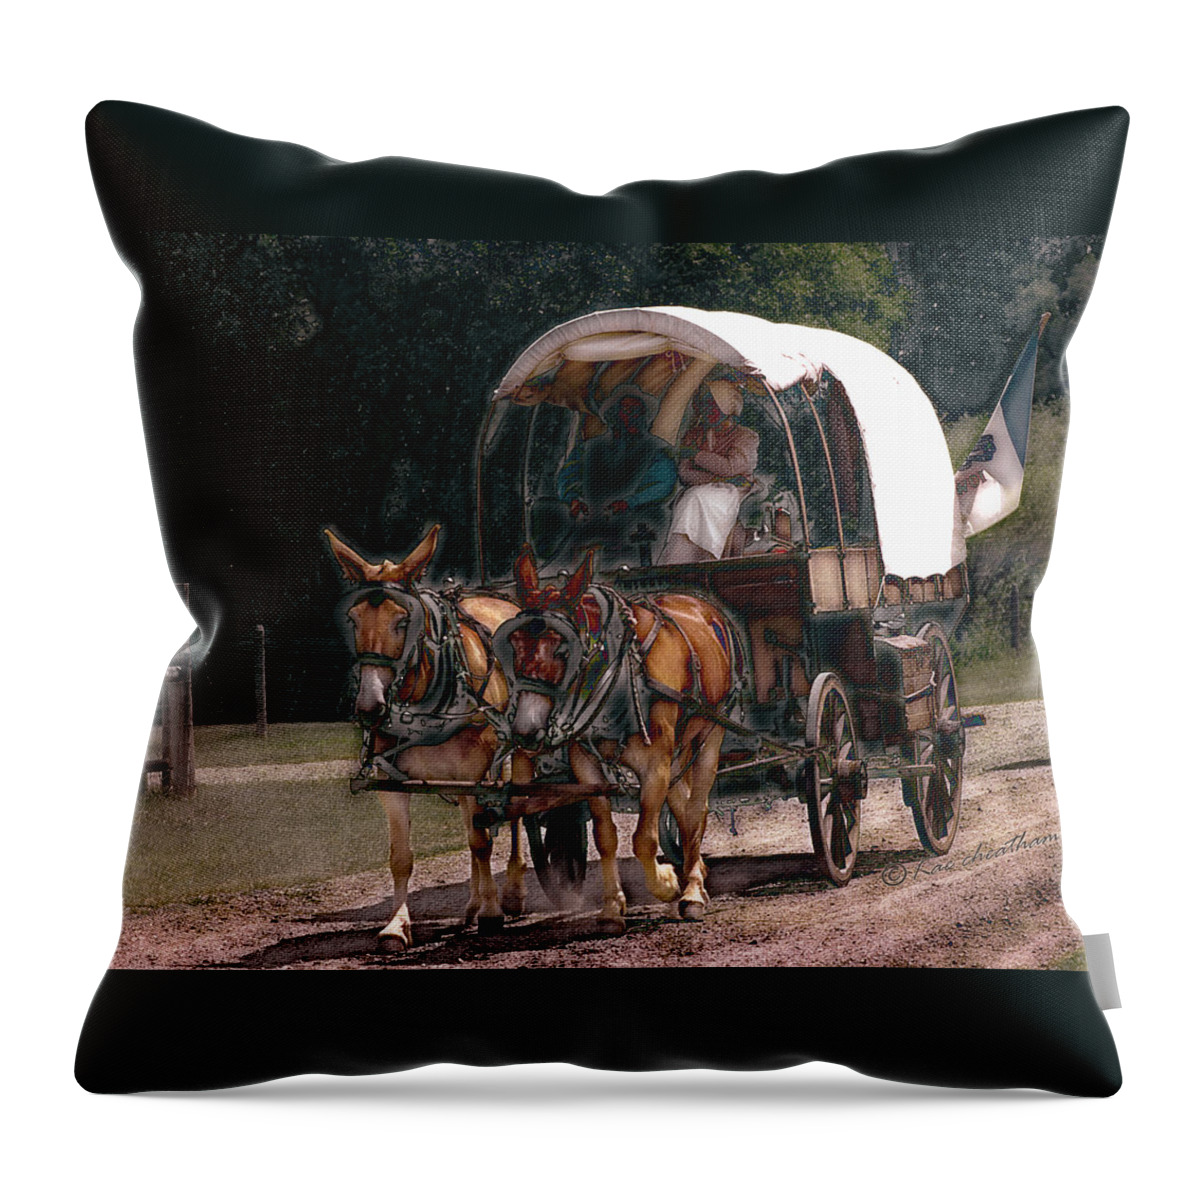 Covered Wagon Throw Pillow featuring the digital art On the Bozeman Trail by Kae Cheatham